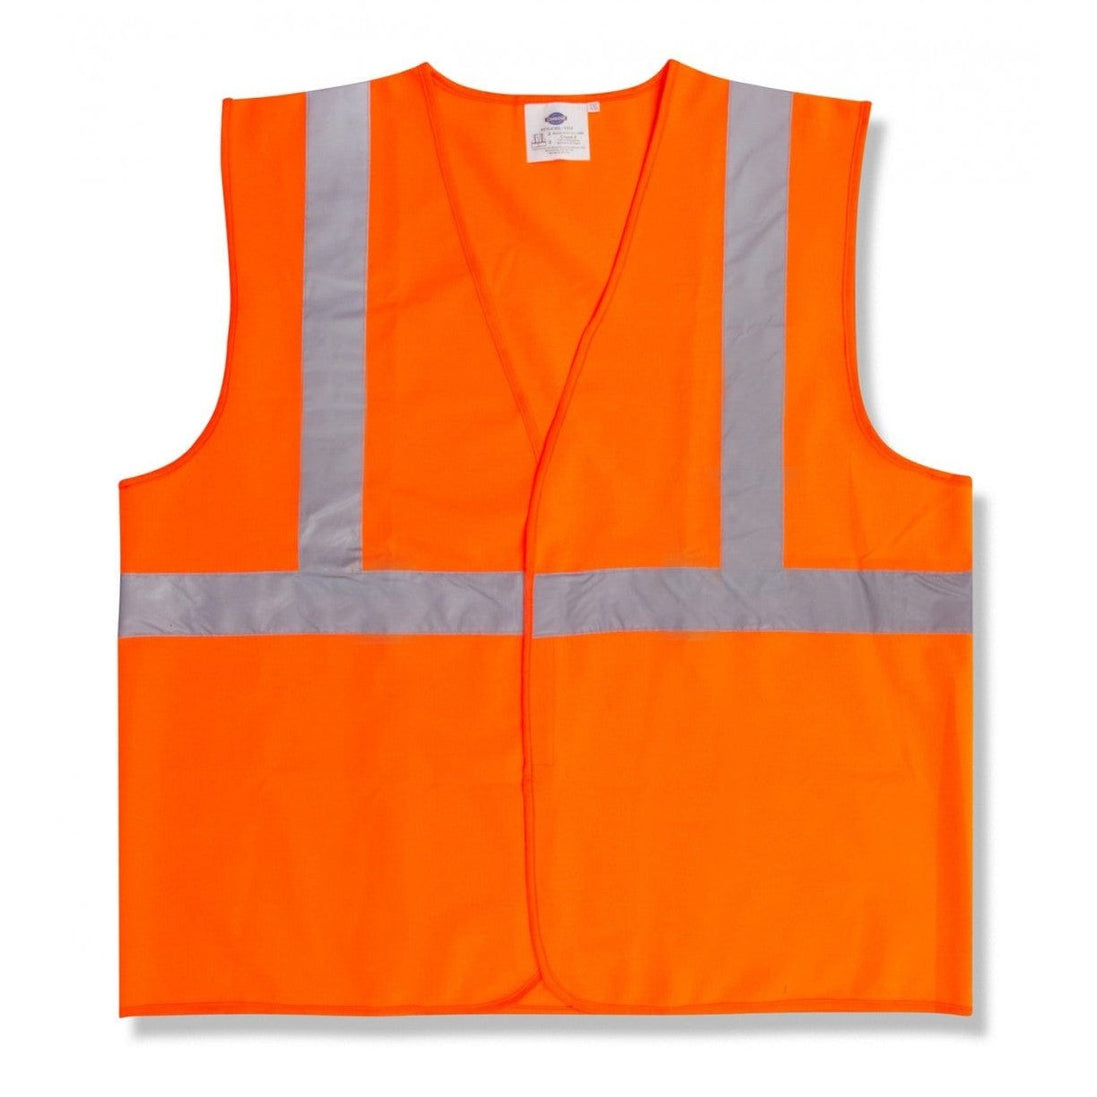 Get the best protection with our Class B Reflective Safety Vest in Orange. Perfect for high-risk work environments. - Buy Online on Supply Master Ghana, Accra Safety Clothing Buy Tools hardware Building materials